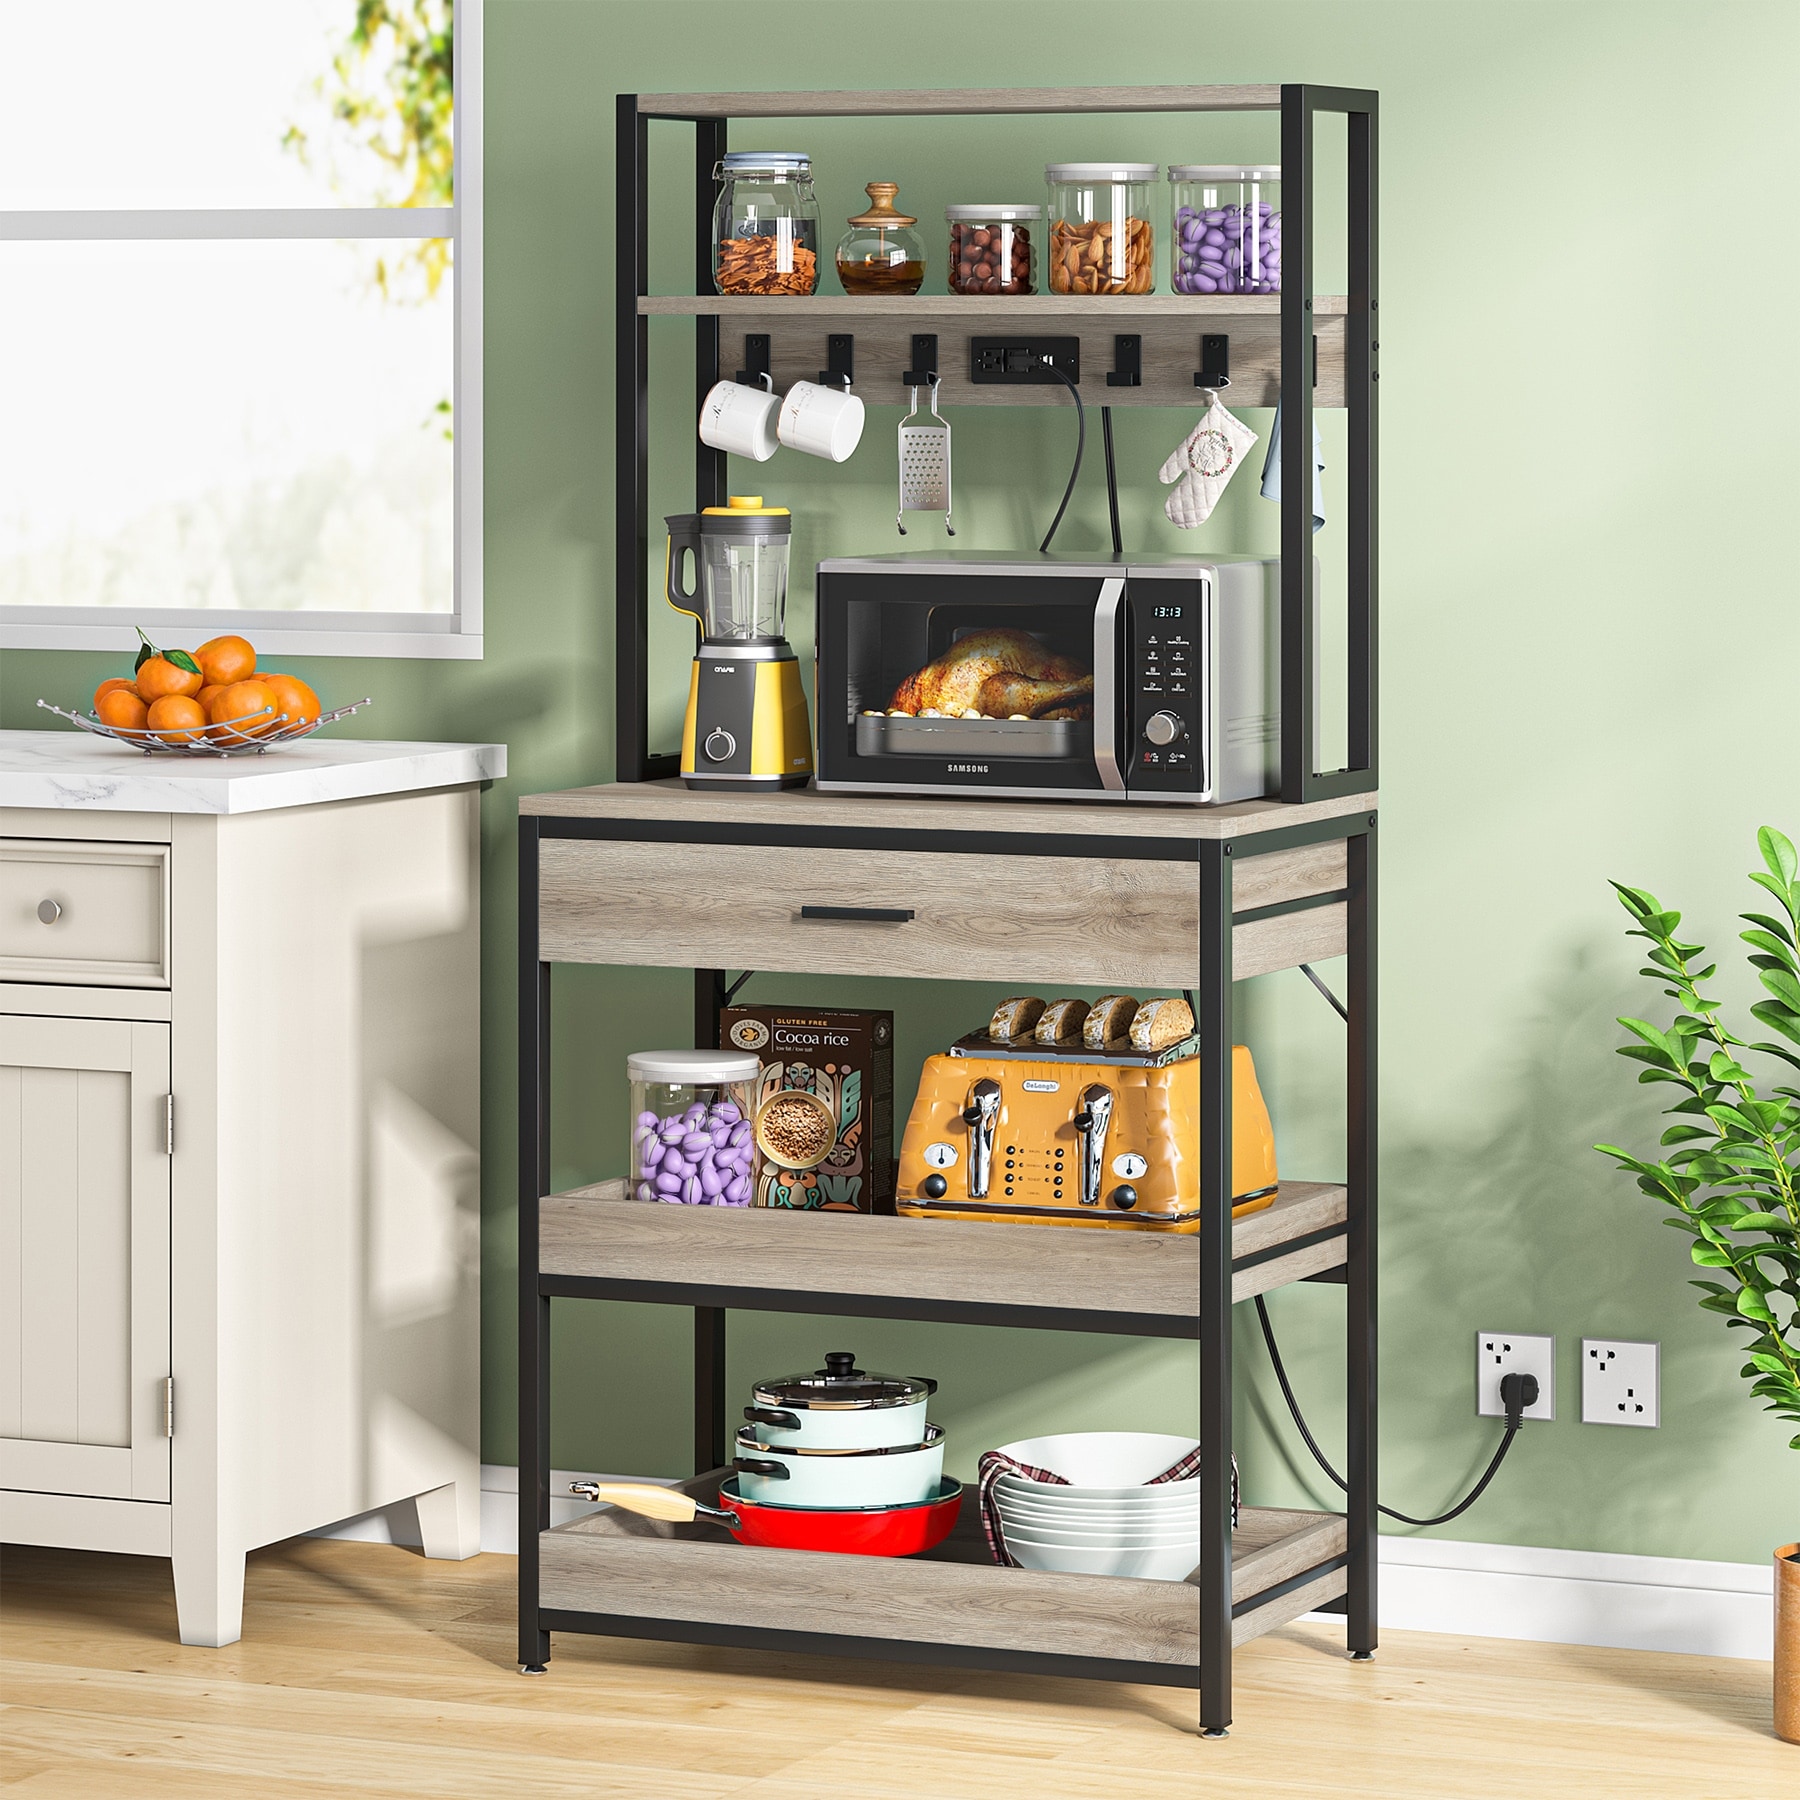 https://ak1.ostkcdn.com/images/products/is/images/direct/7683abece0f2f45098f84449fdf704156433ba46/5-Tier-Bakers-Rack-with-Power-Outlets-for-Kitchen-with-Storage-Shelves-and-Drawers%2C-Coffer-Bar-Station.jpg